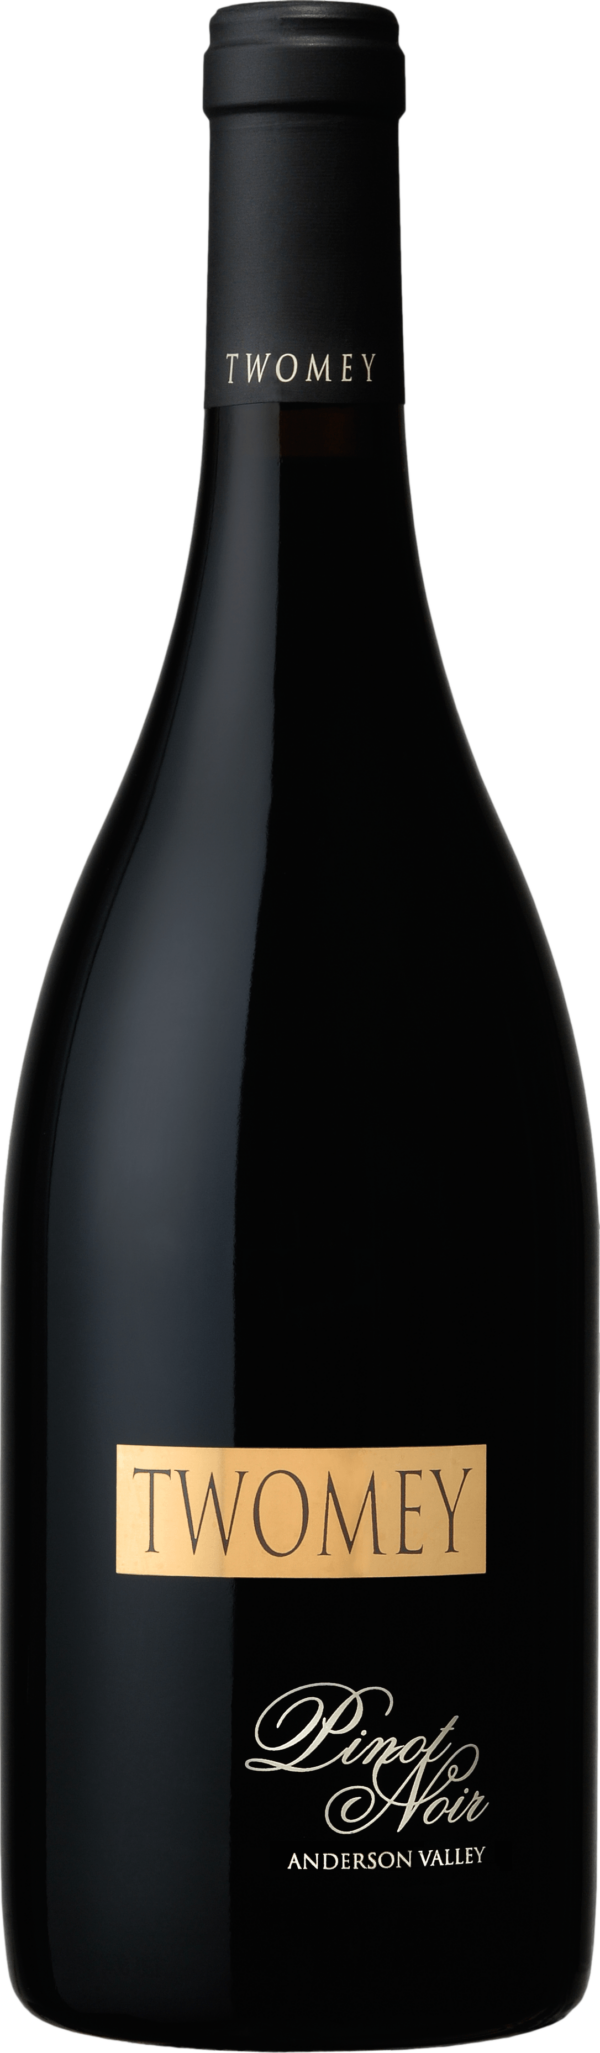 Product image of Twomey Pinot Noir Anderson Valley 2015 from 8wines